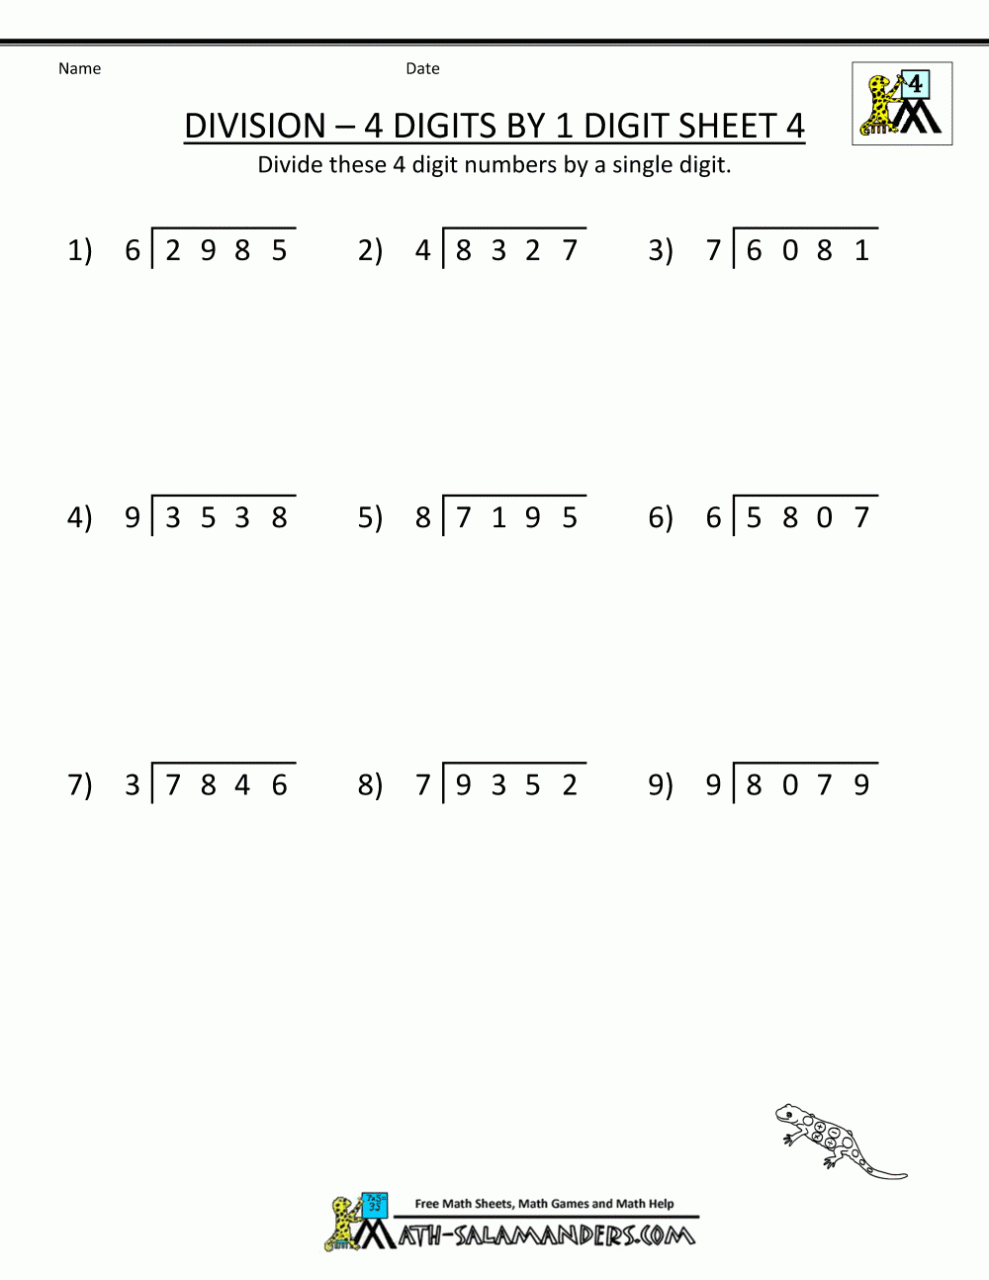 Worksheet Of Division For Class 4th